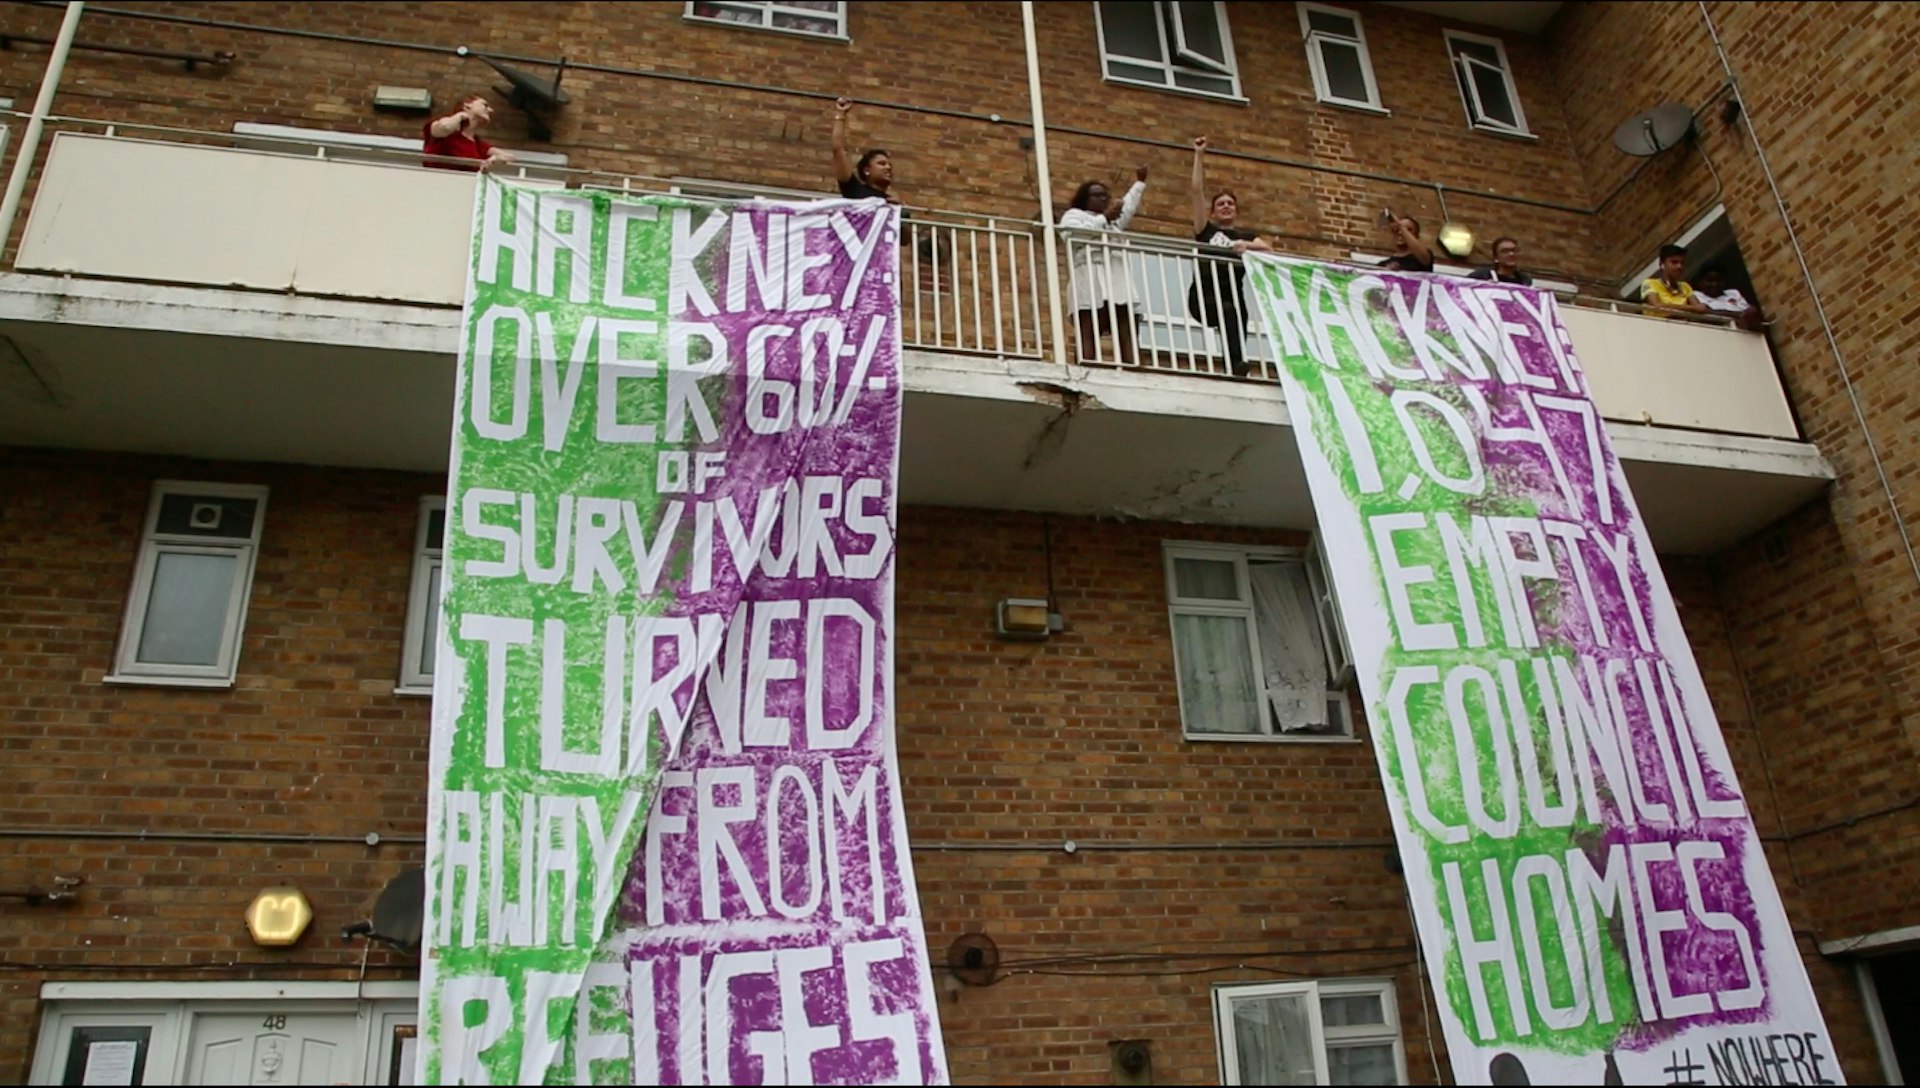 Sisters Uncut occupy empty home to demand action on domestic violence